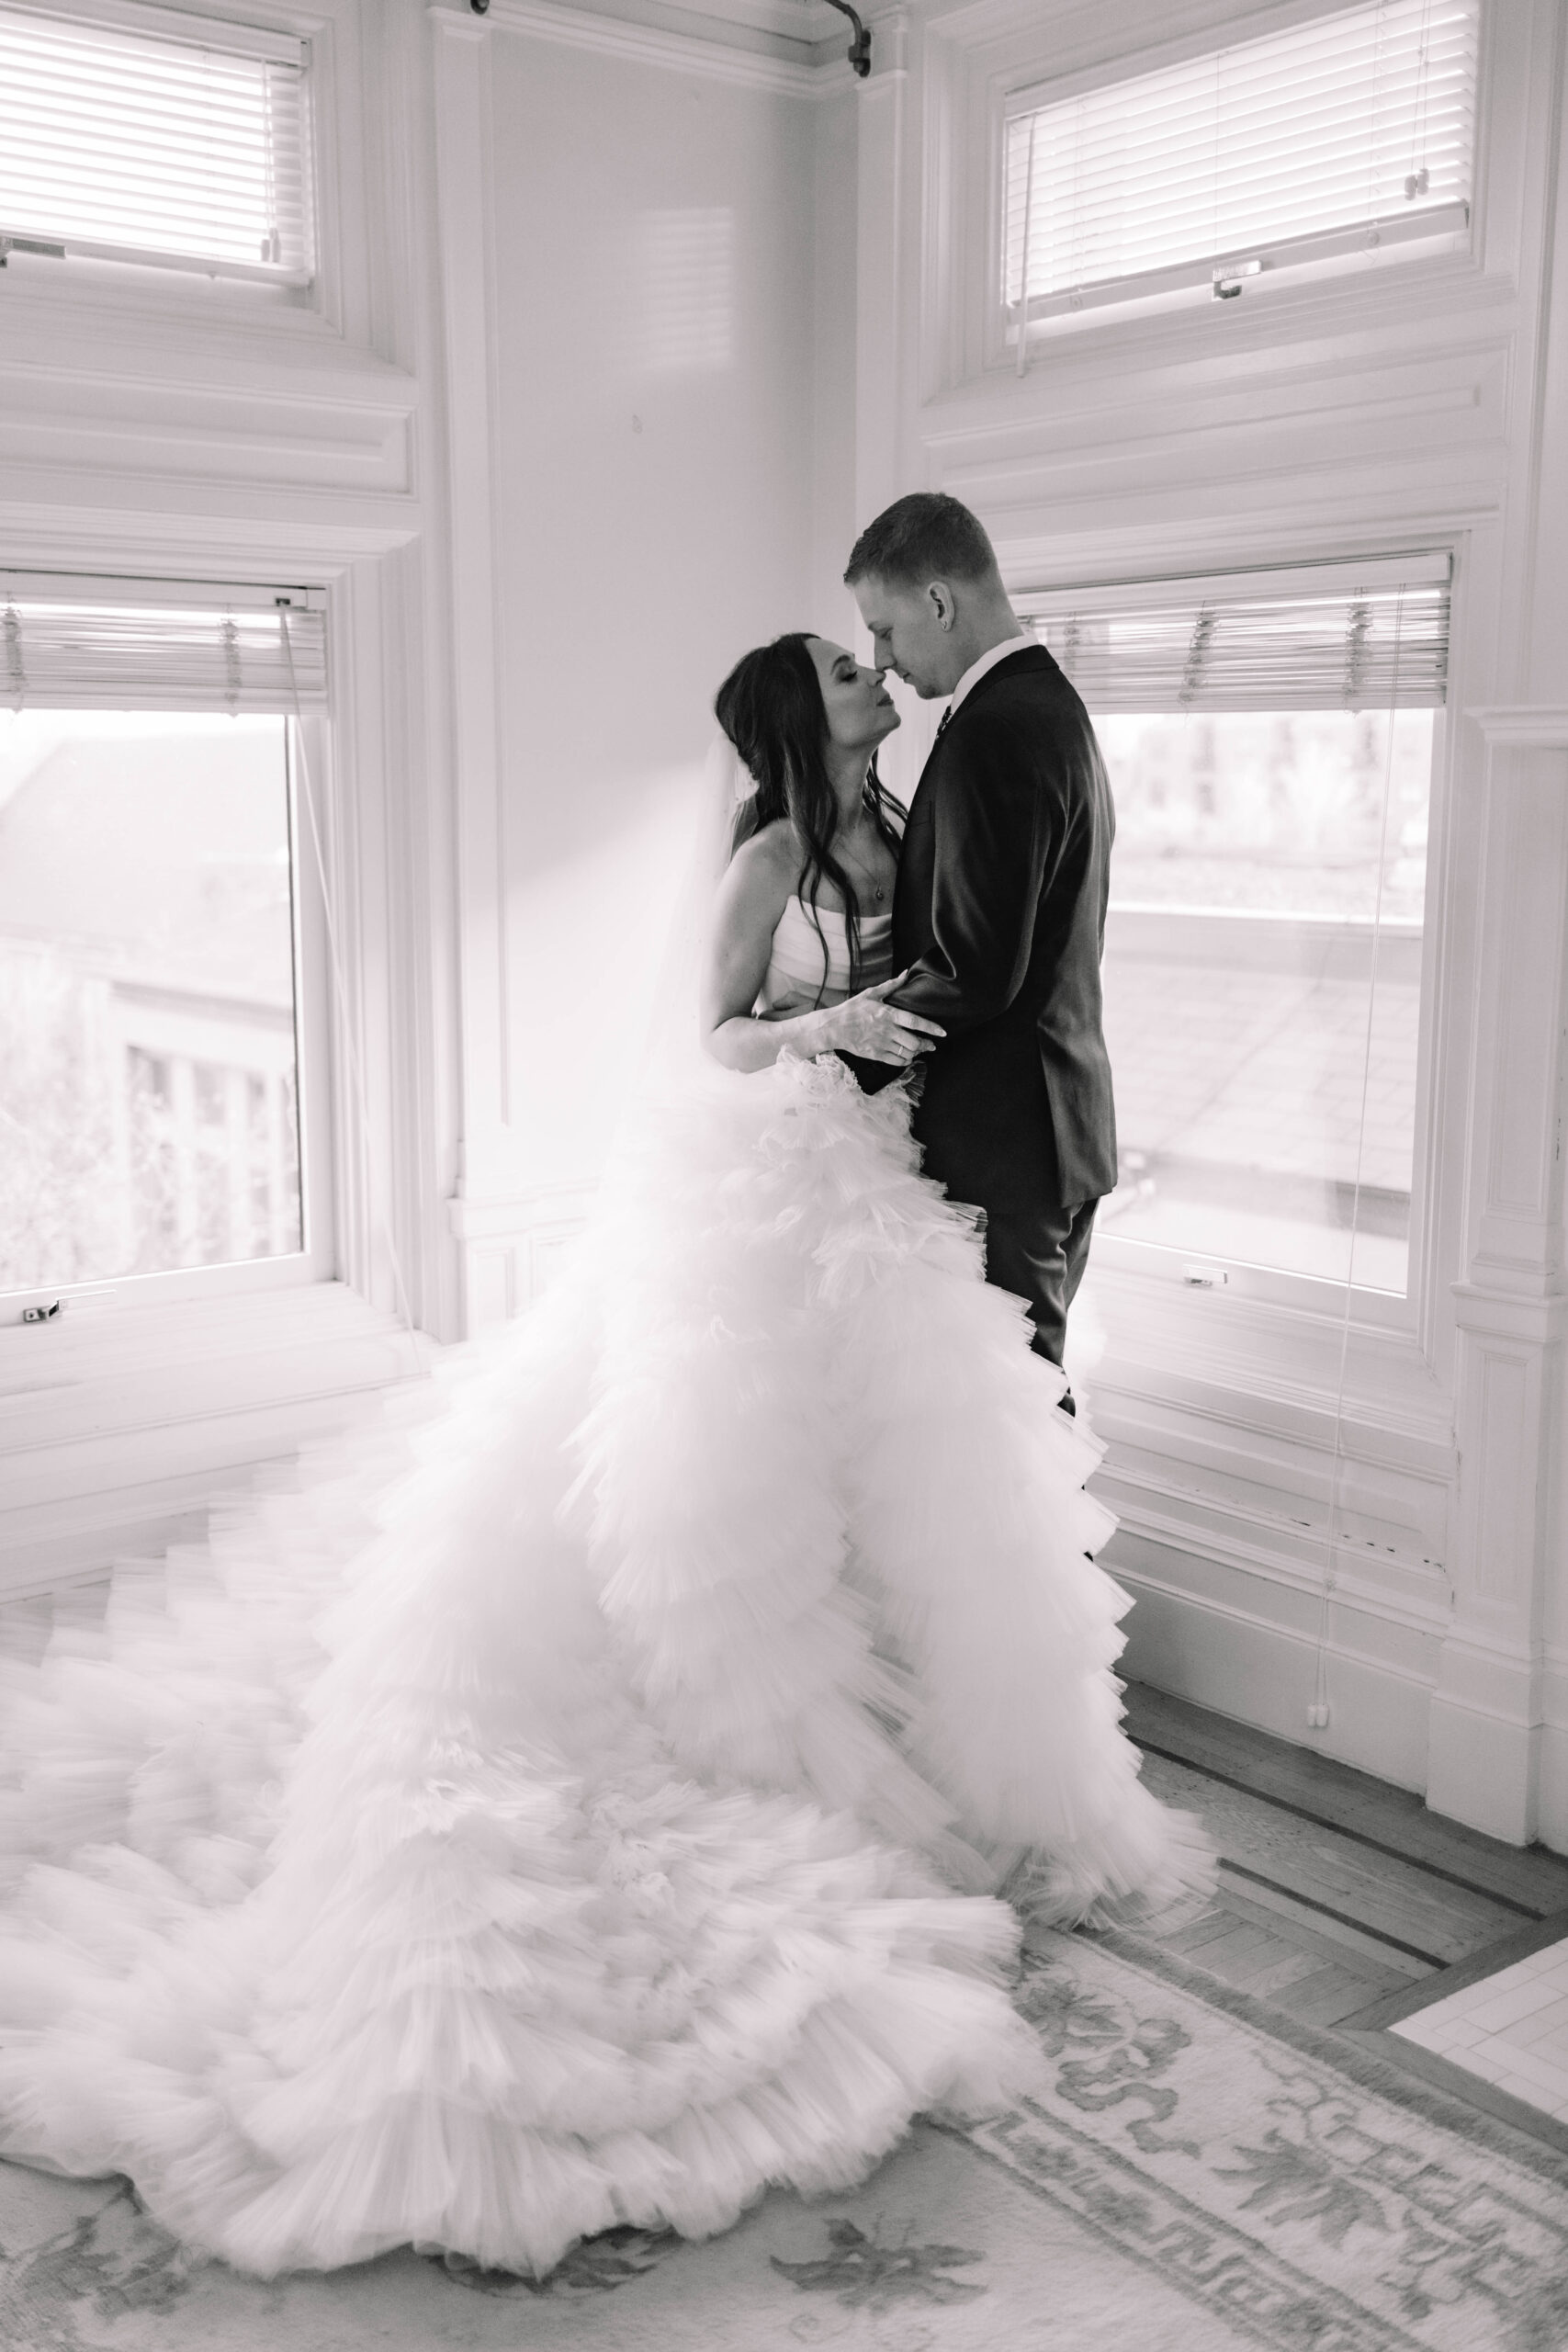 A bride in a white gown and a groom in a black suit share an intimate moment by a window in a softly lit room.